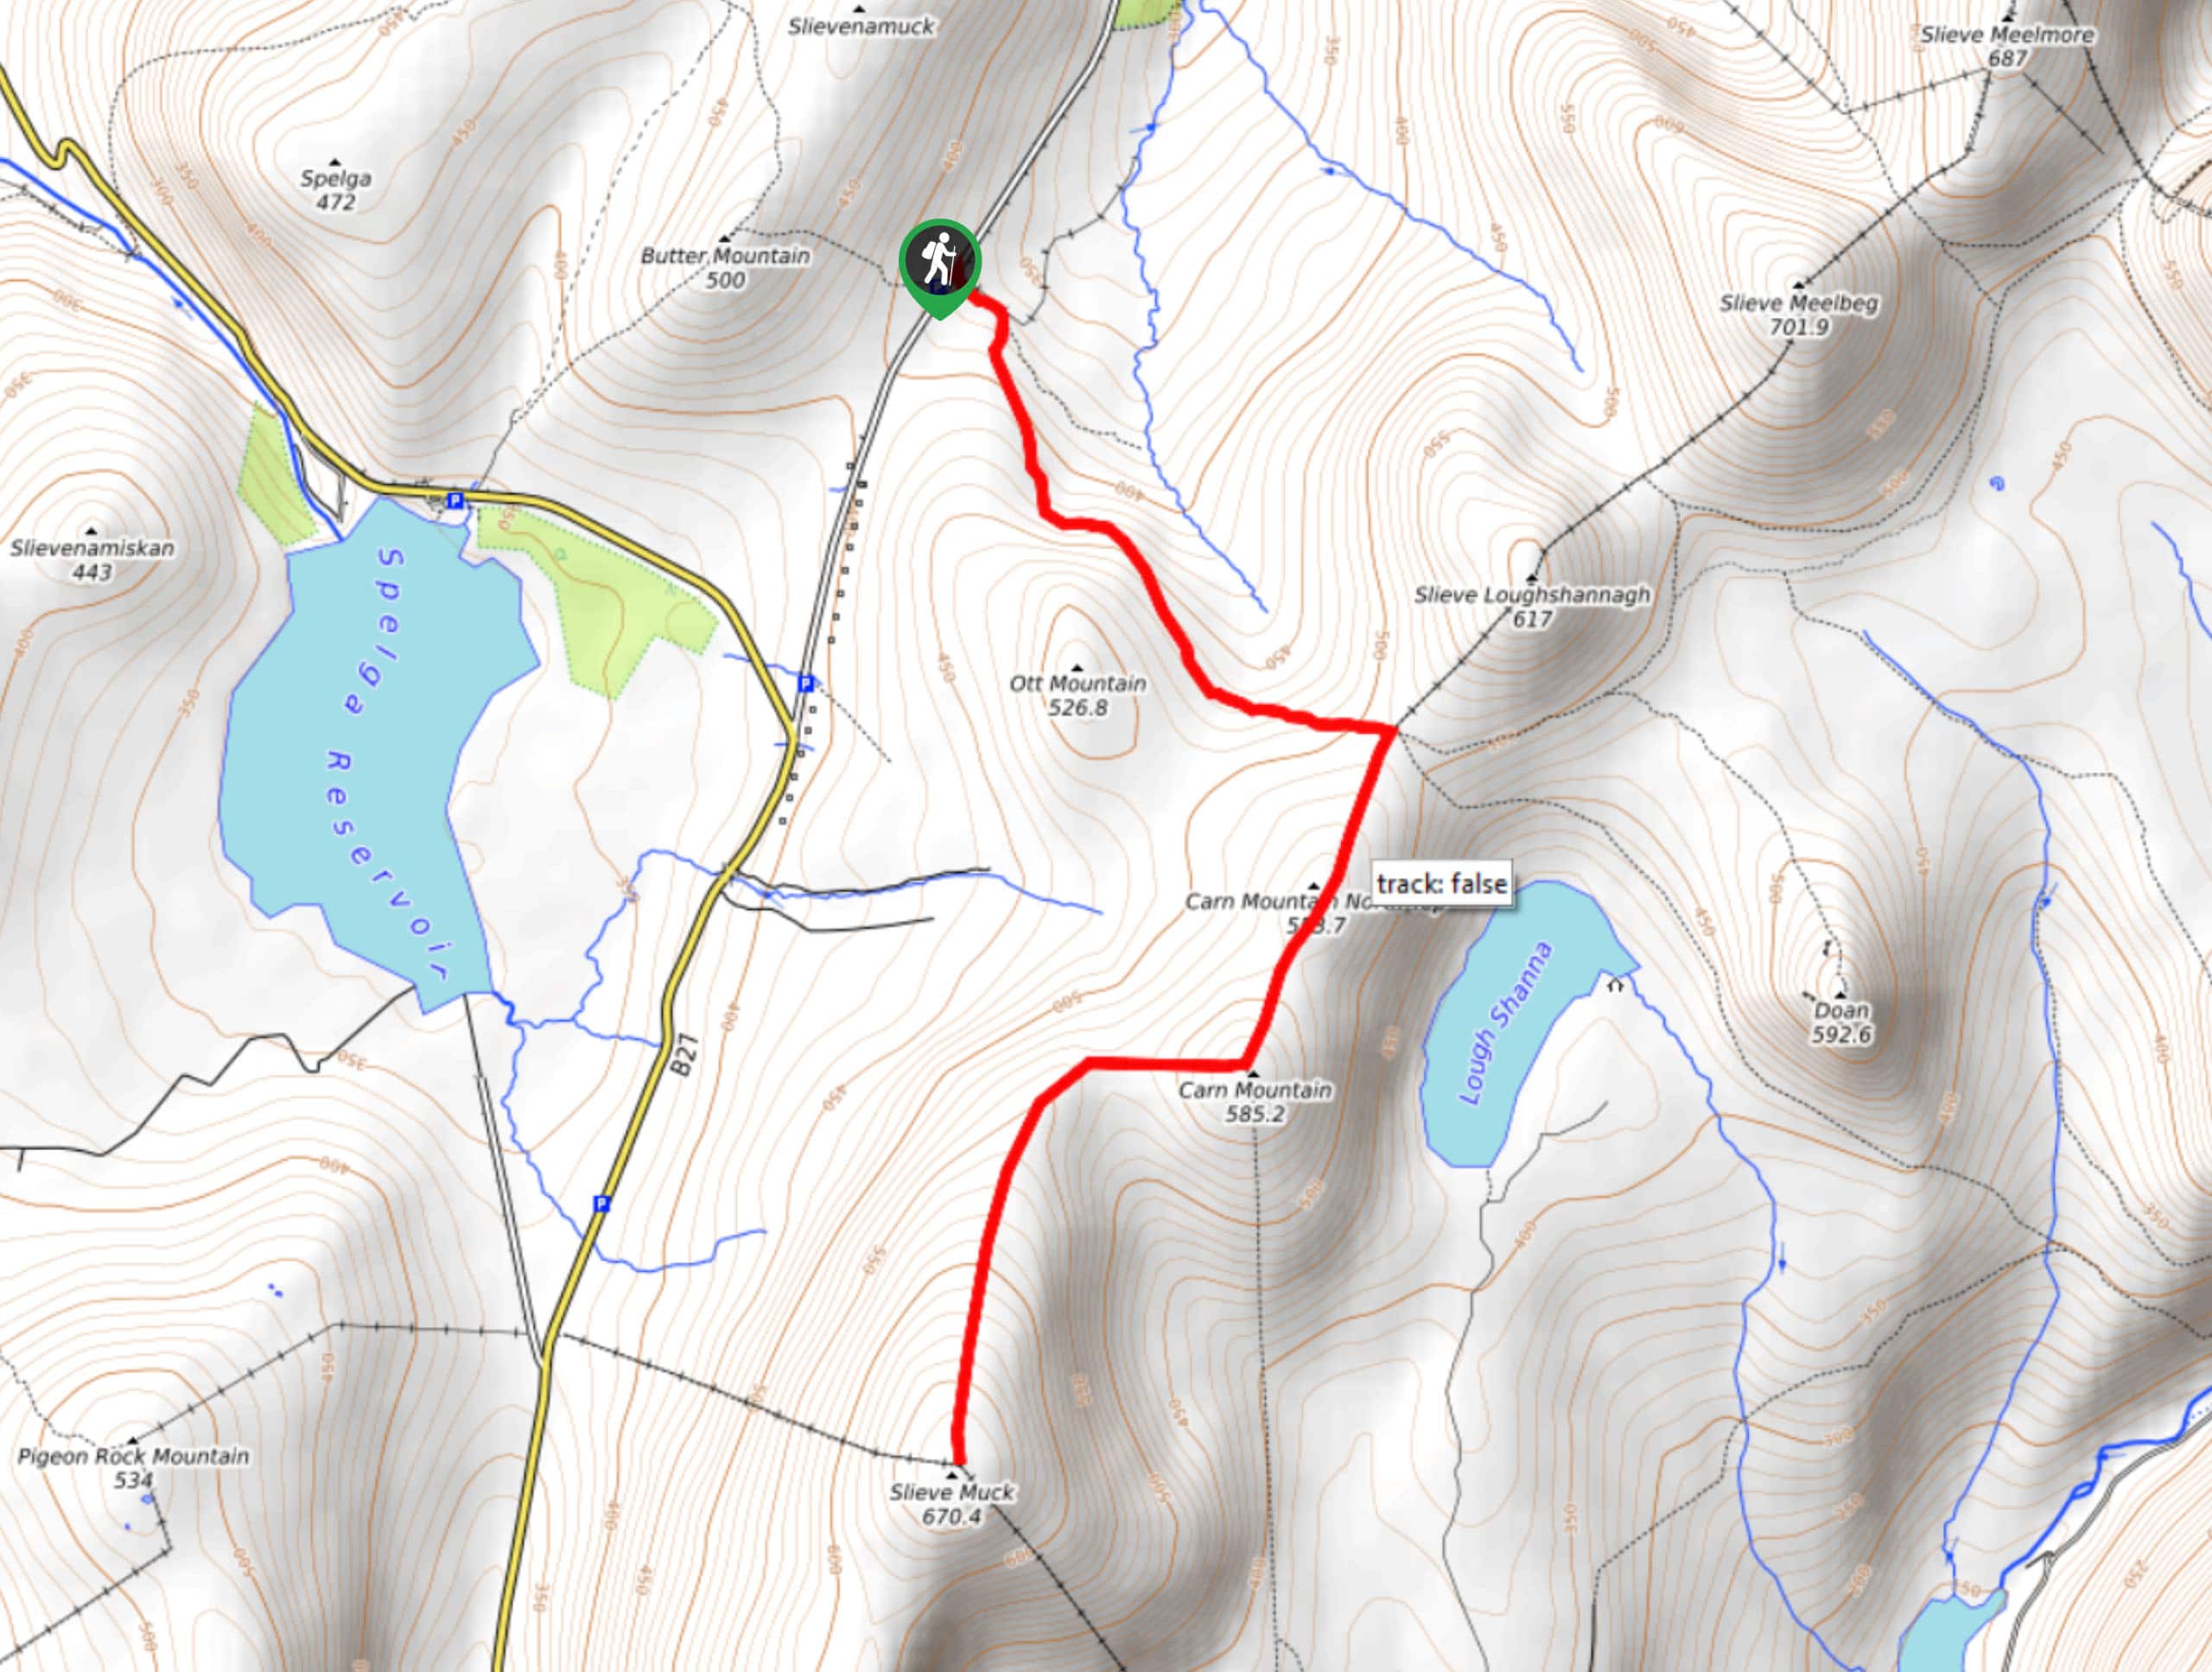 Slieve Muck and Carn Mountain via Ott Track Map